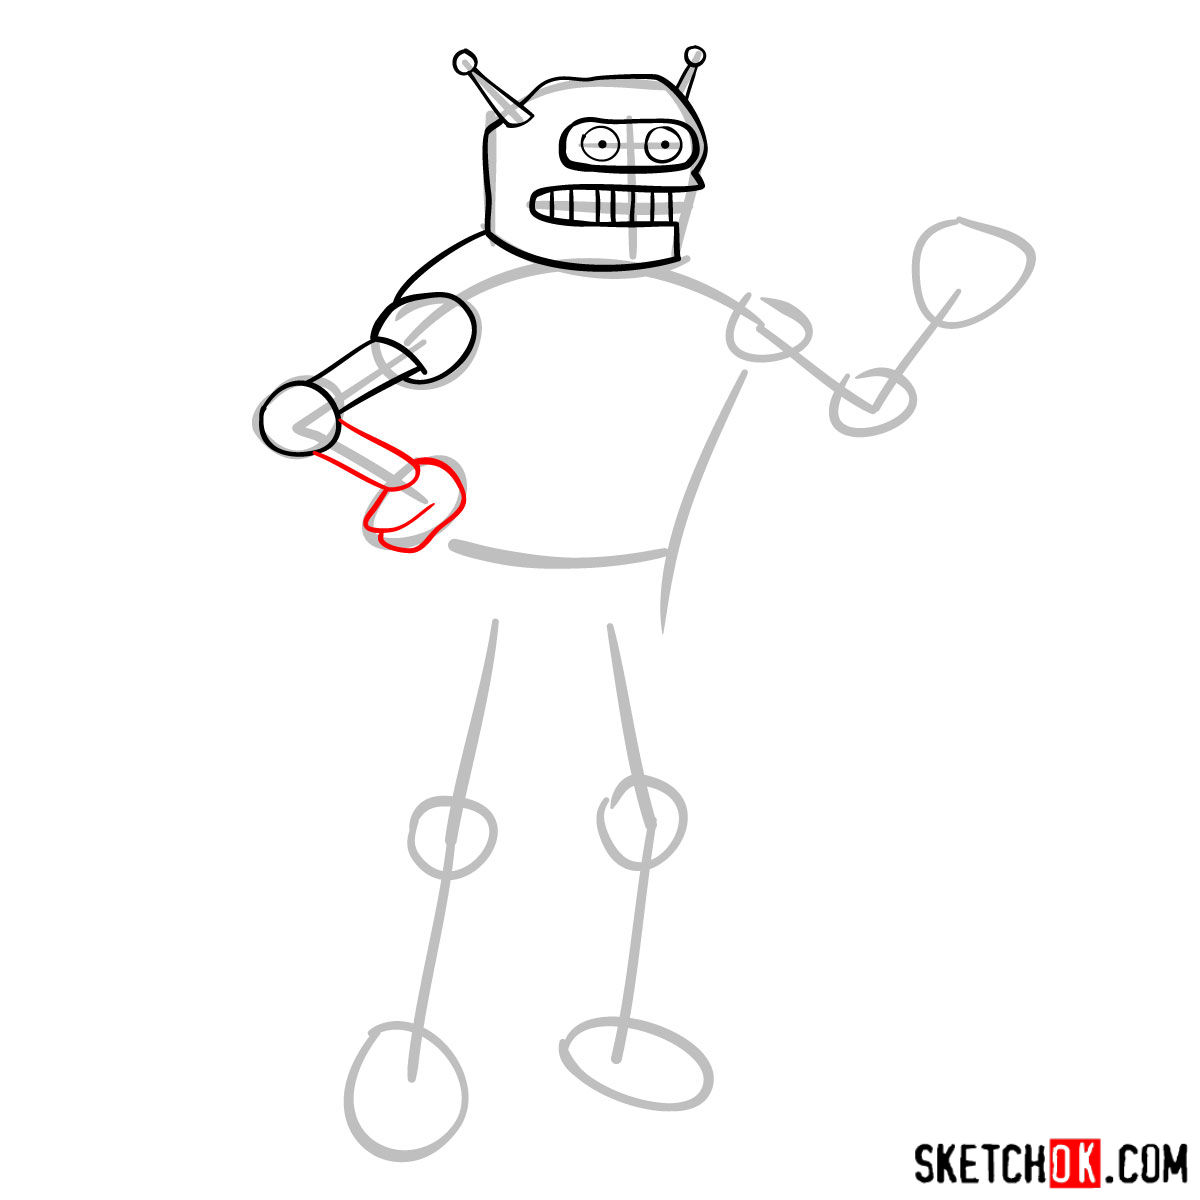 How to draw Calculon from Futurama - step 05